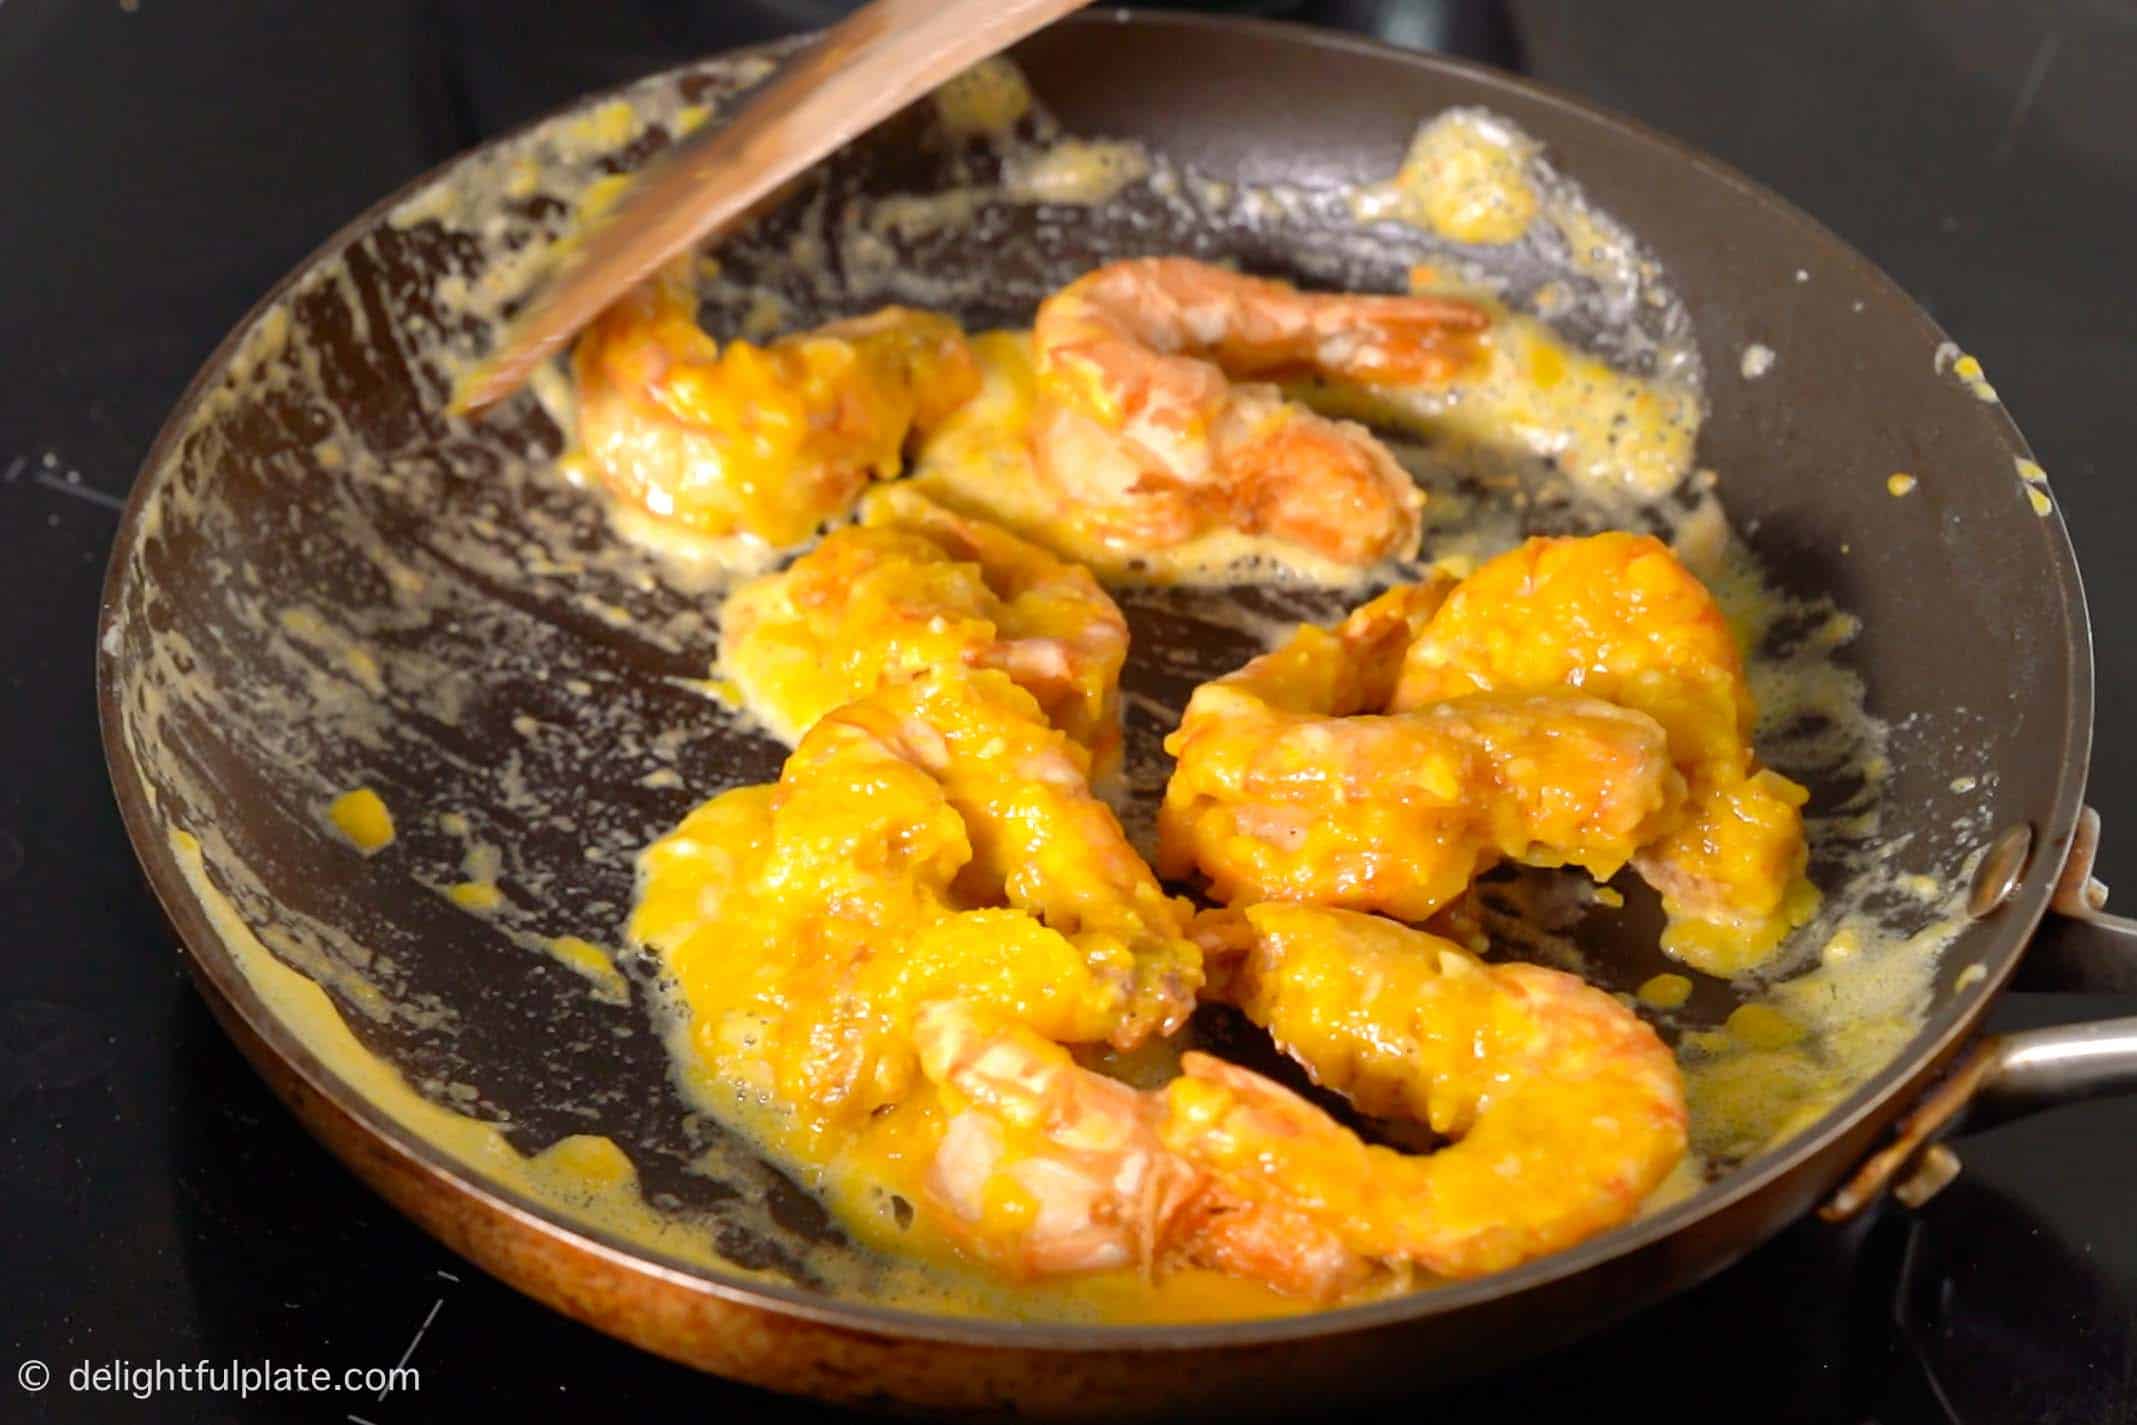 coating the shrimp with the salted egg sauce.